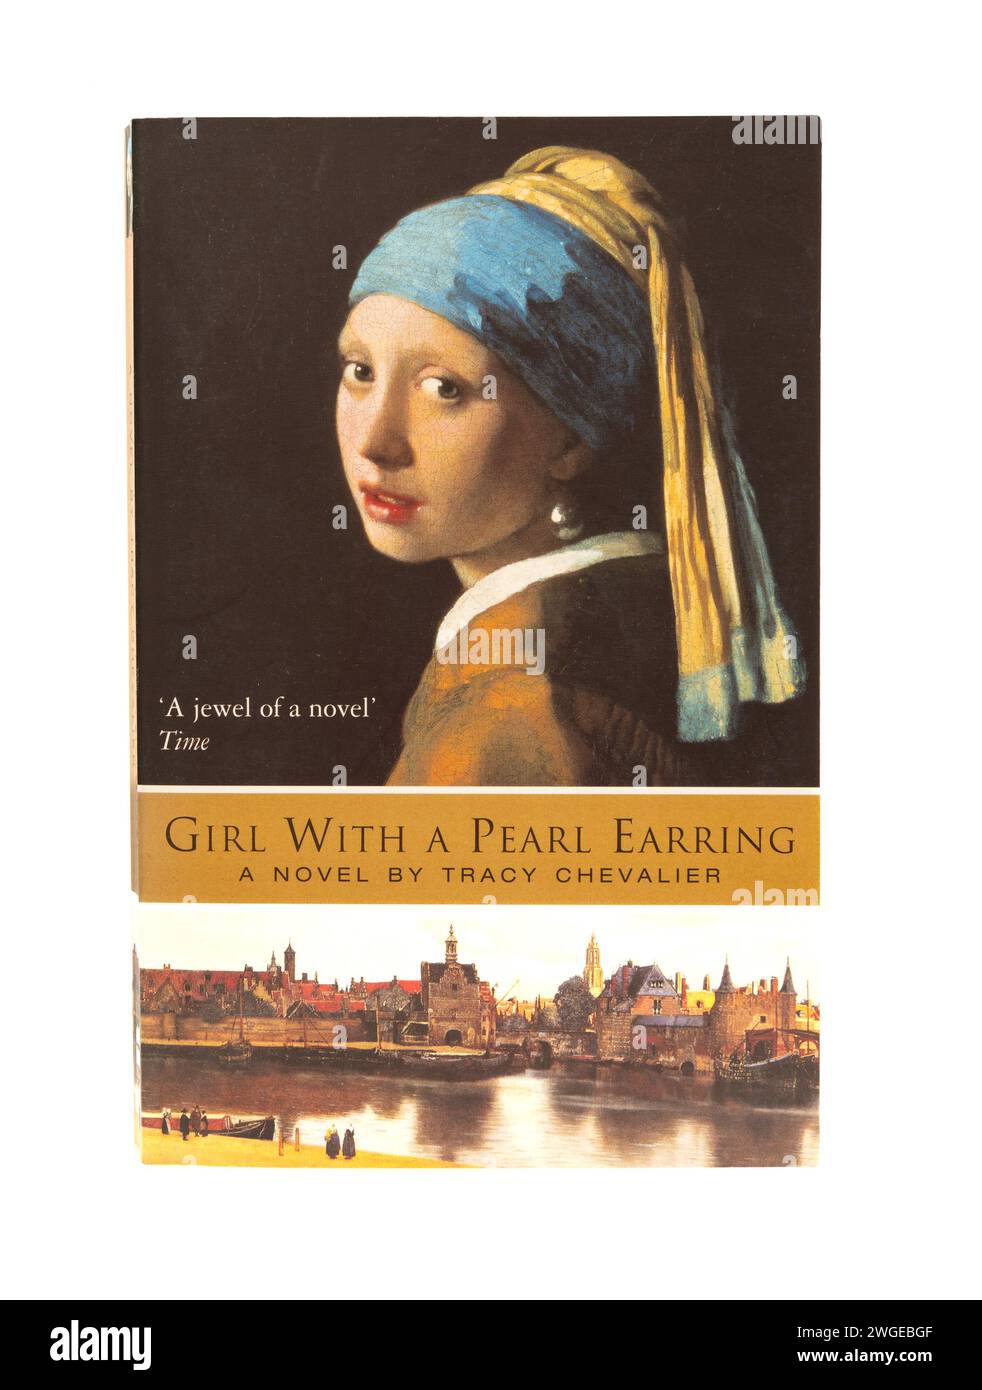 Girl With A Pearl Earring A Novel by Tracy Chevalier Stock Photo